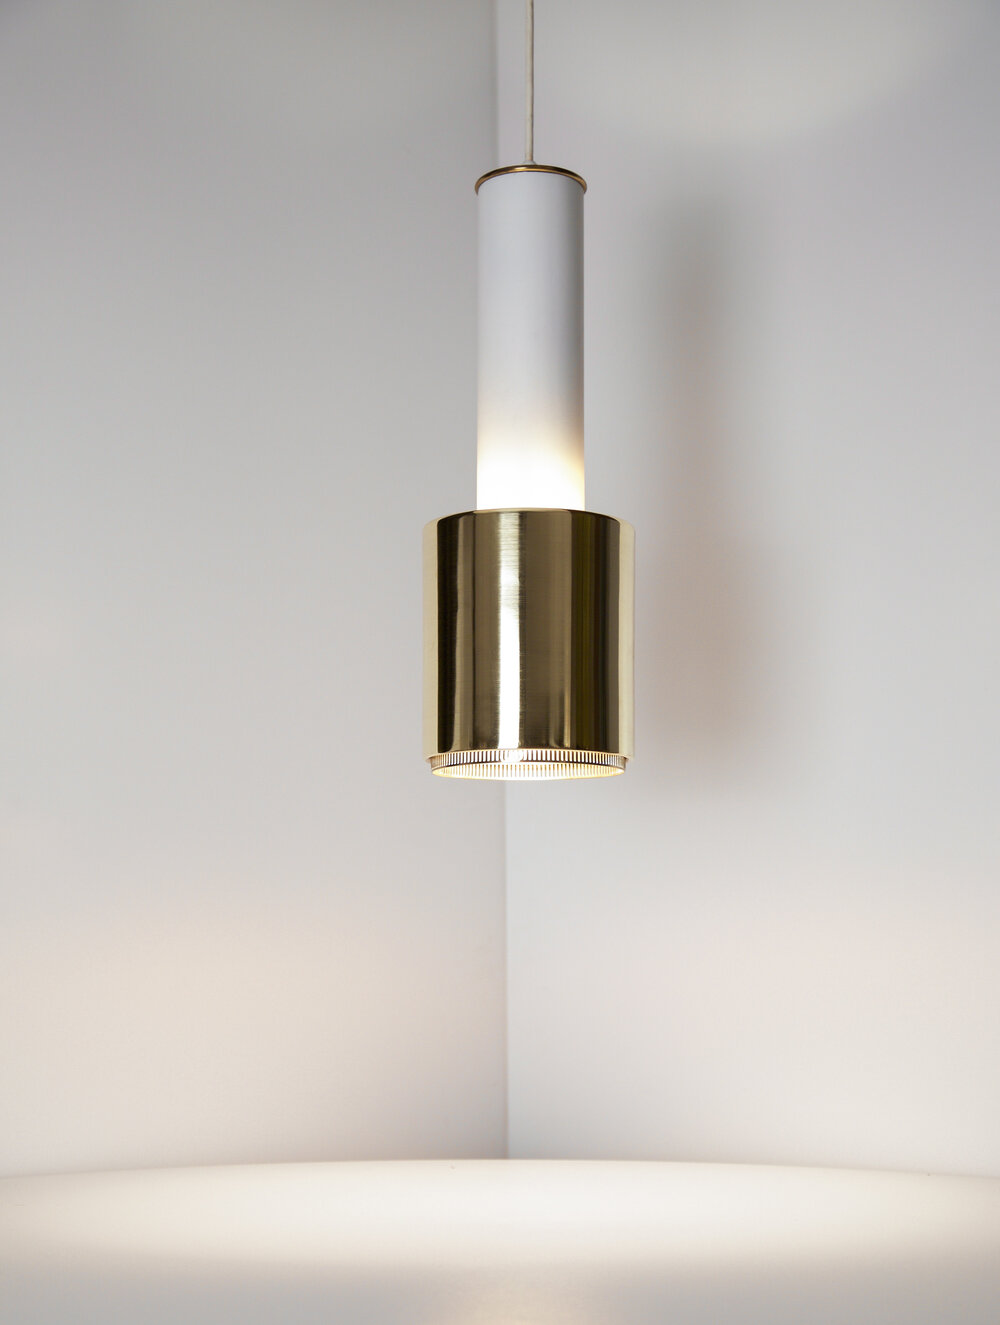 Early Production Alvar Aalto Pendant Light A110 1950s — The Exchange Int